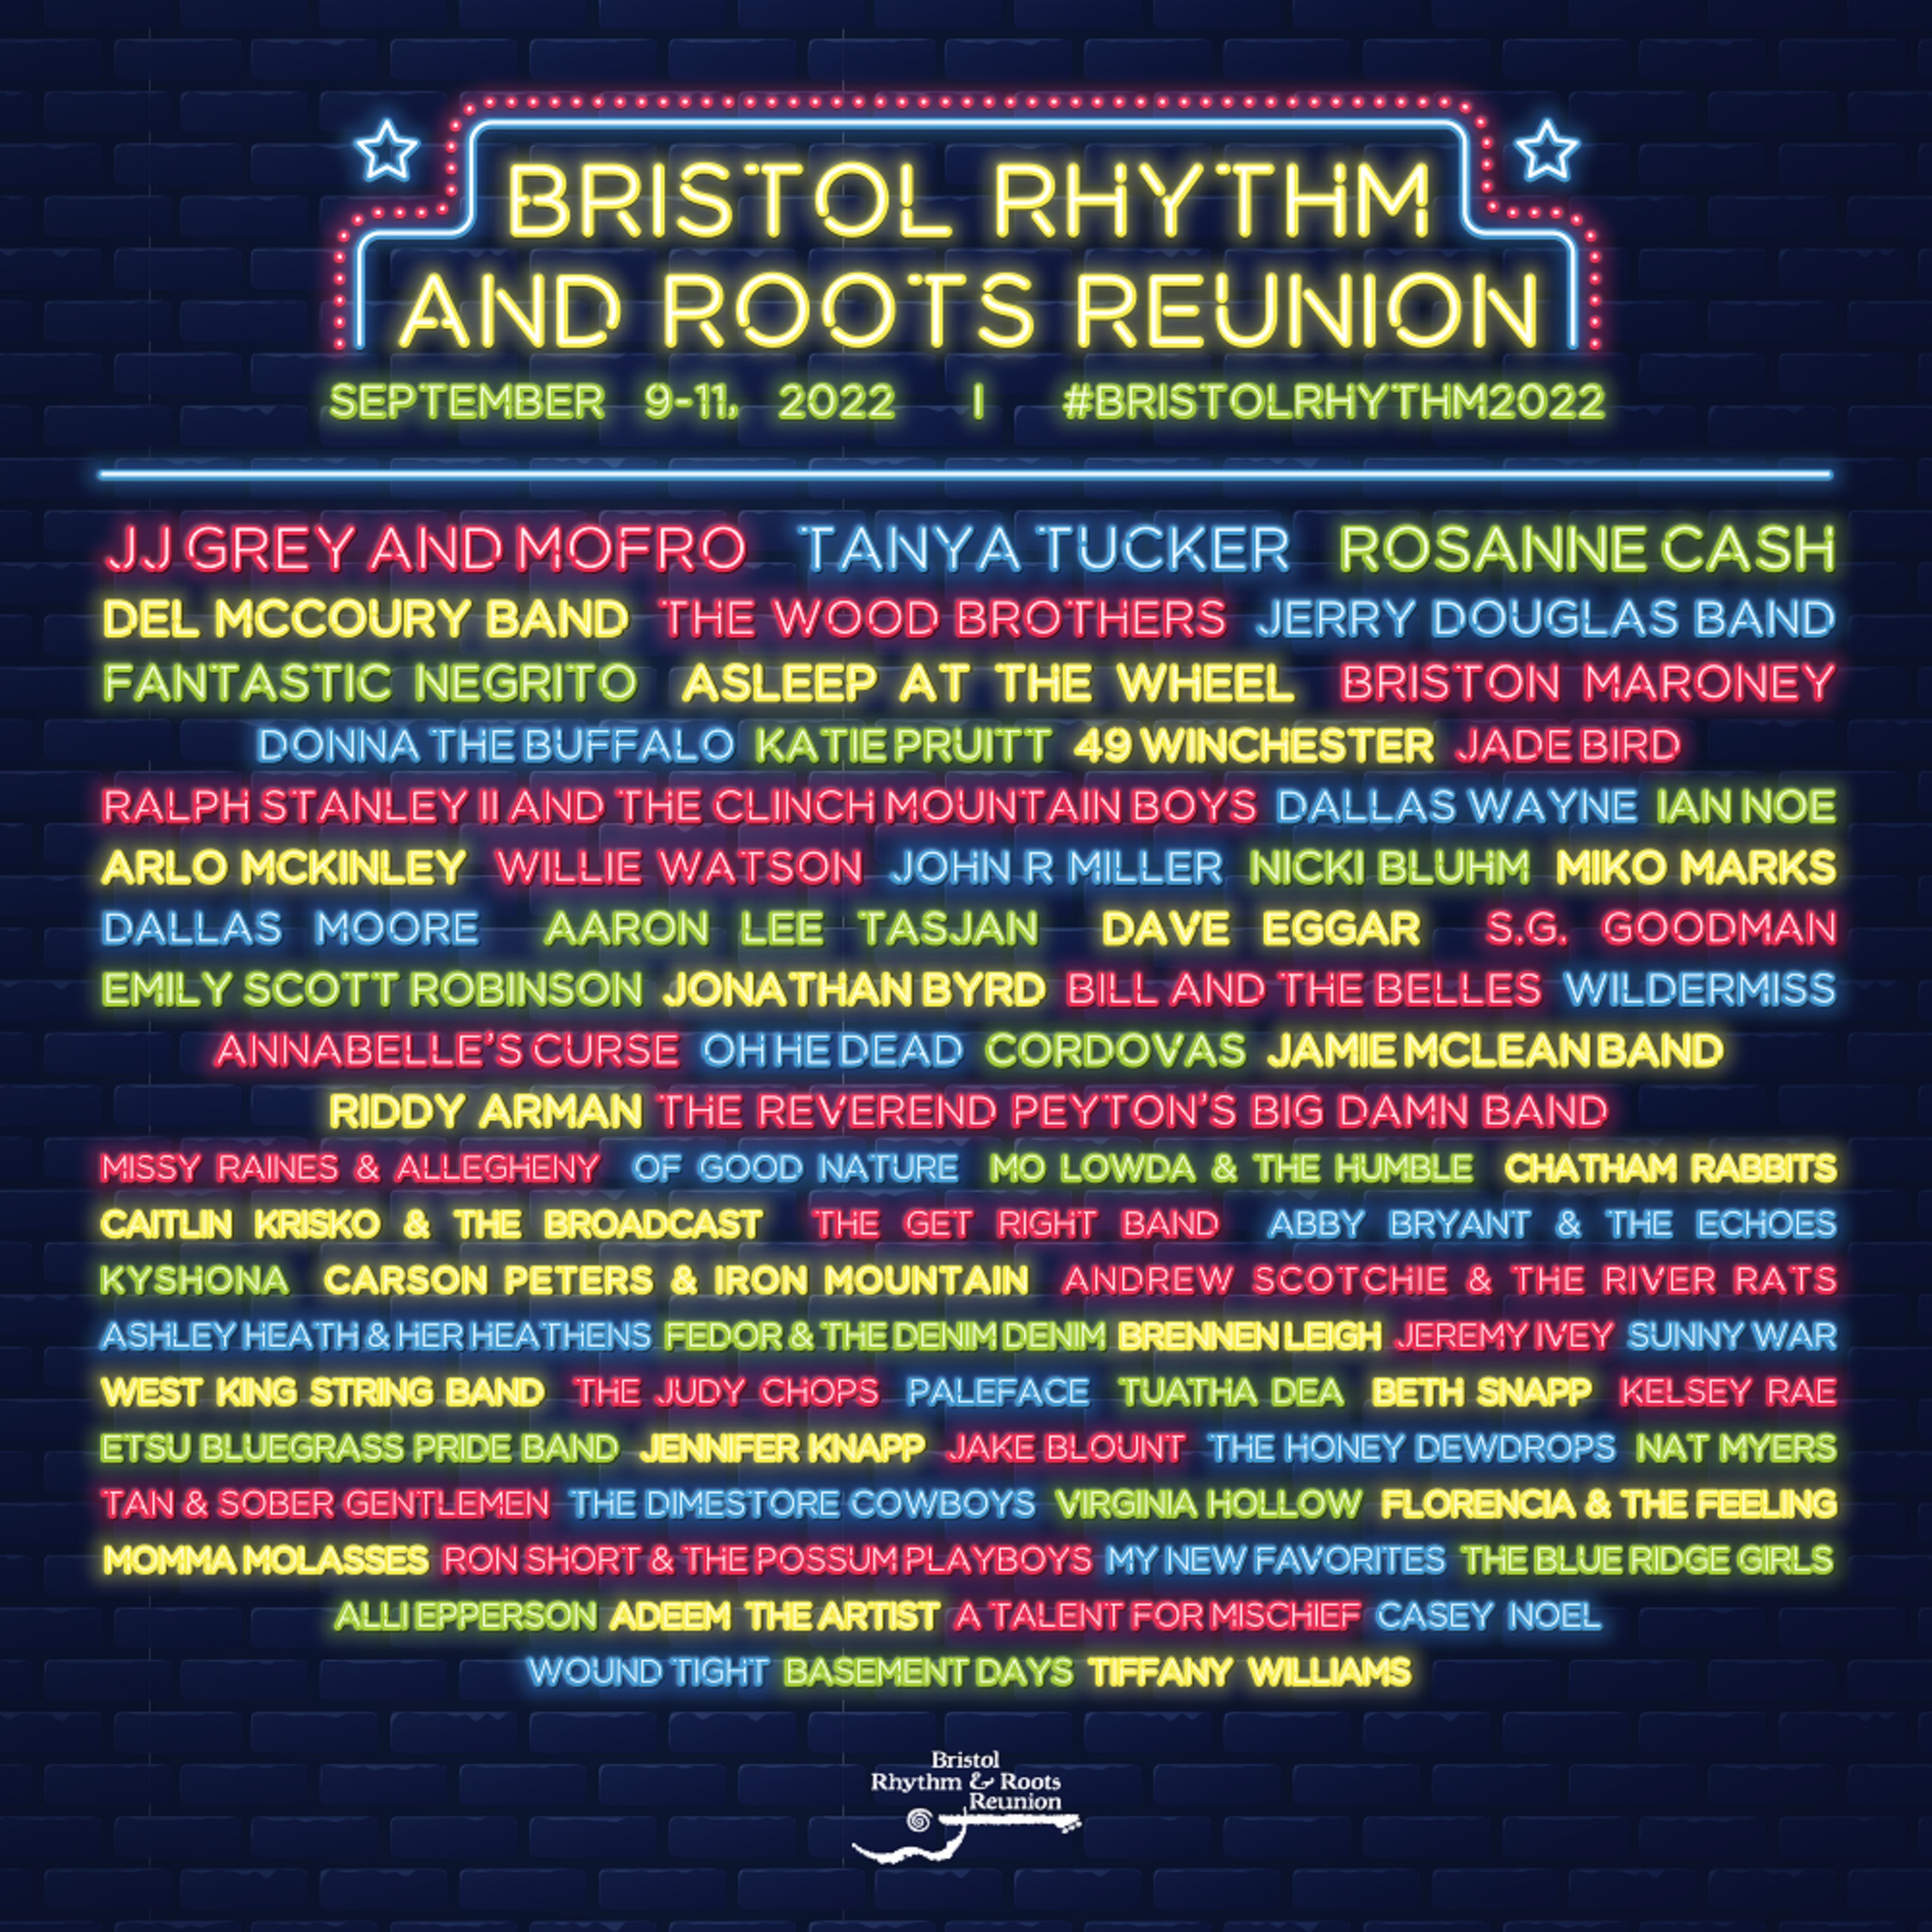 The Wood Brothers, Fantastic Negrito to Perform at Bristol Rhythm 2022